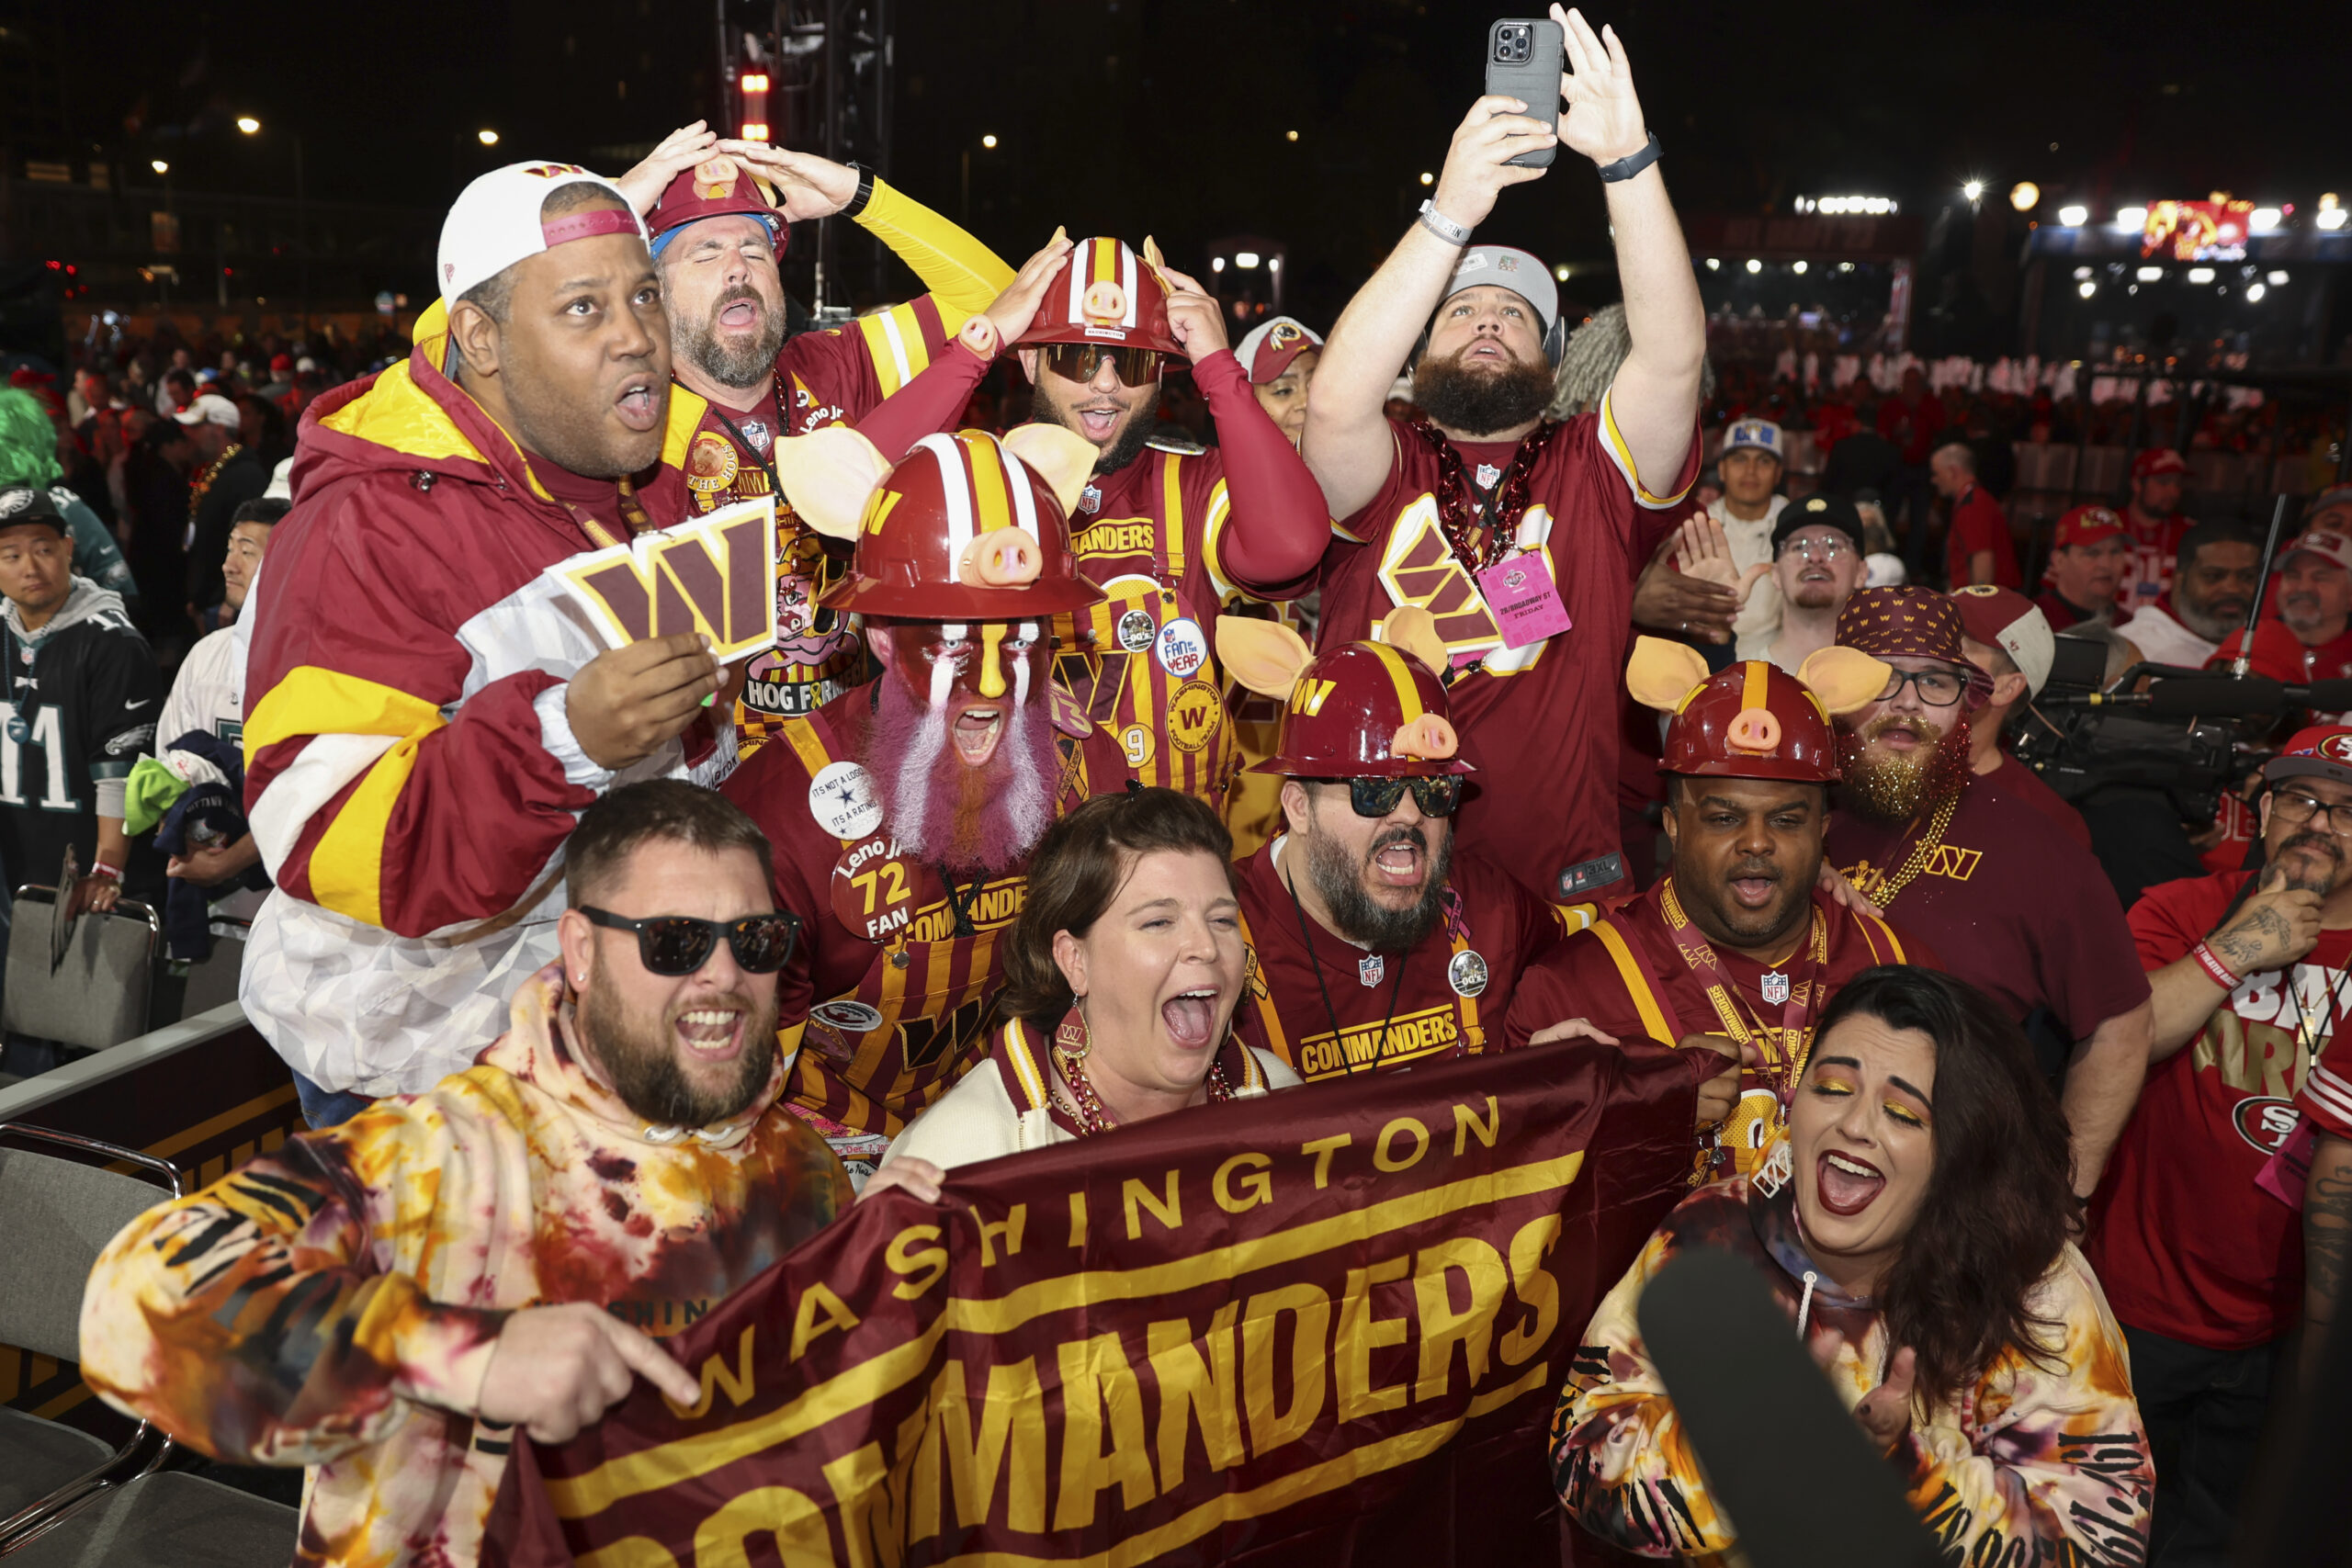 NEWS Report: Washington Commanders fans approve of front office trading away Sweat and Young…